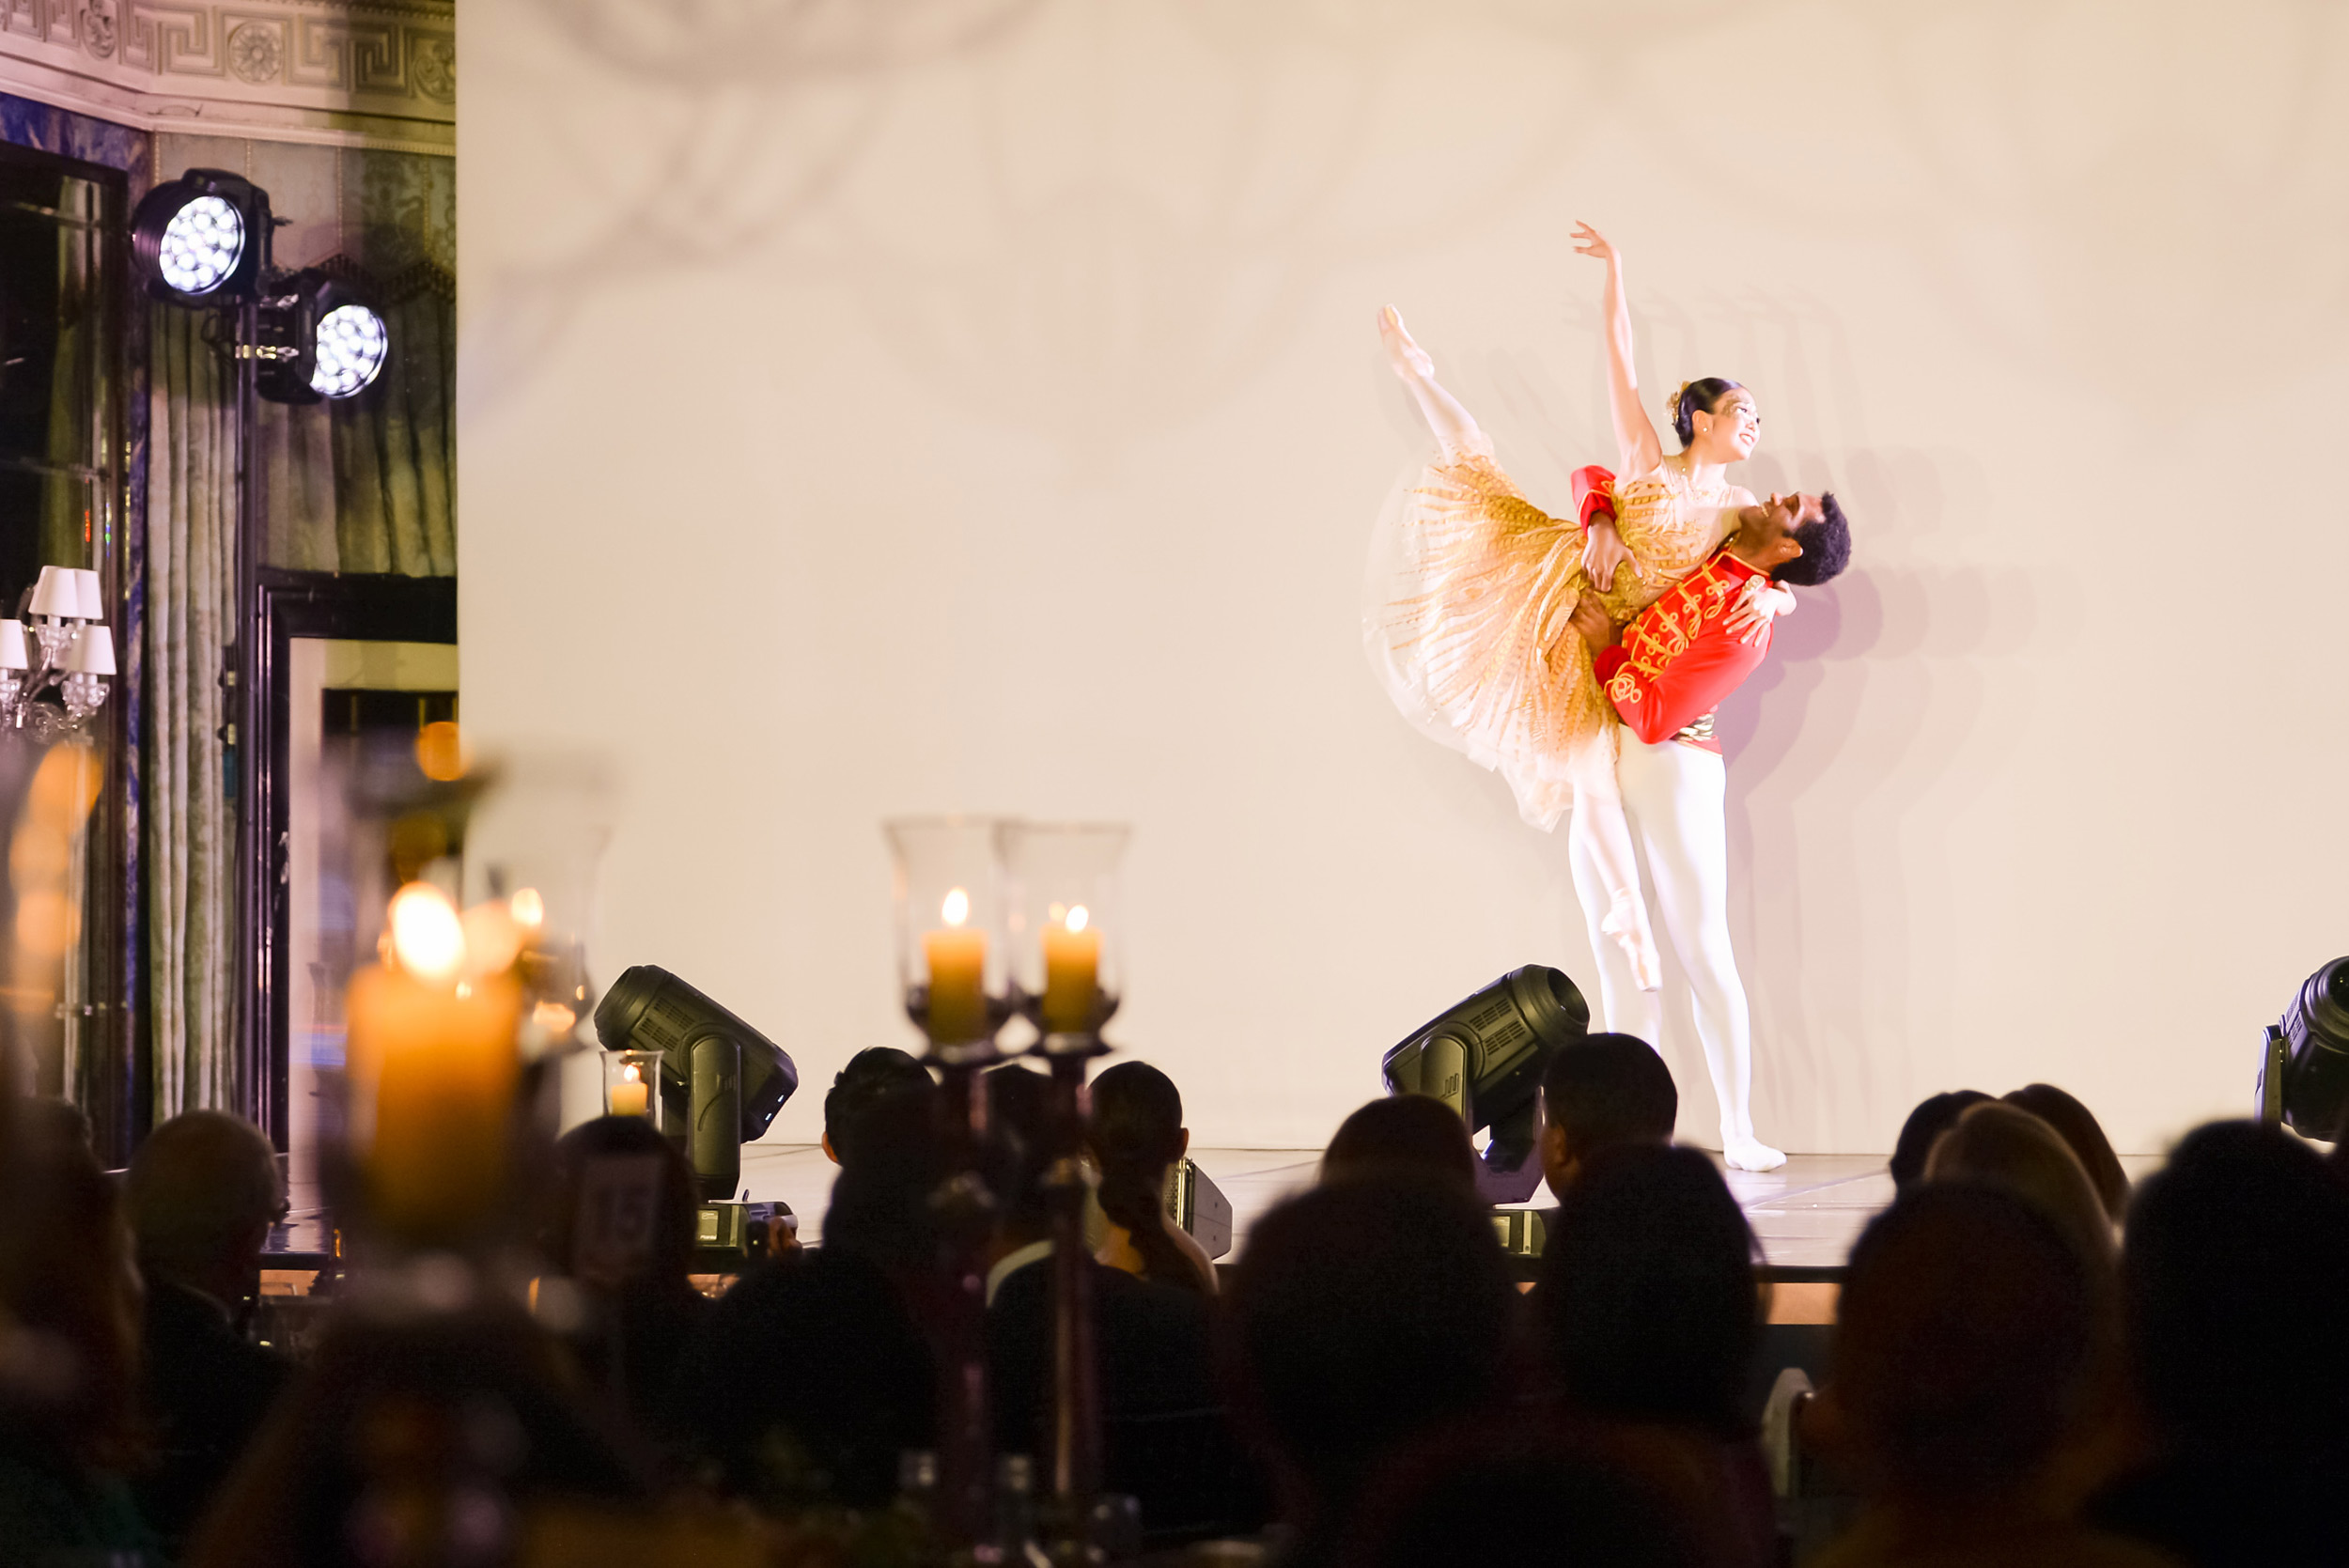 Shiori Kase and Junor Souza performing an extract from Christopher Wheeldon's Cinderella at our Spring Gala 2019 © Photography by ASH